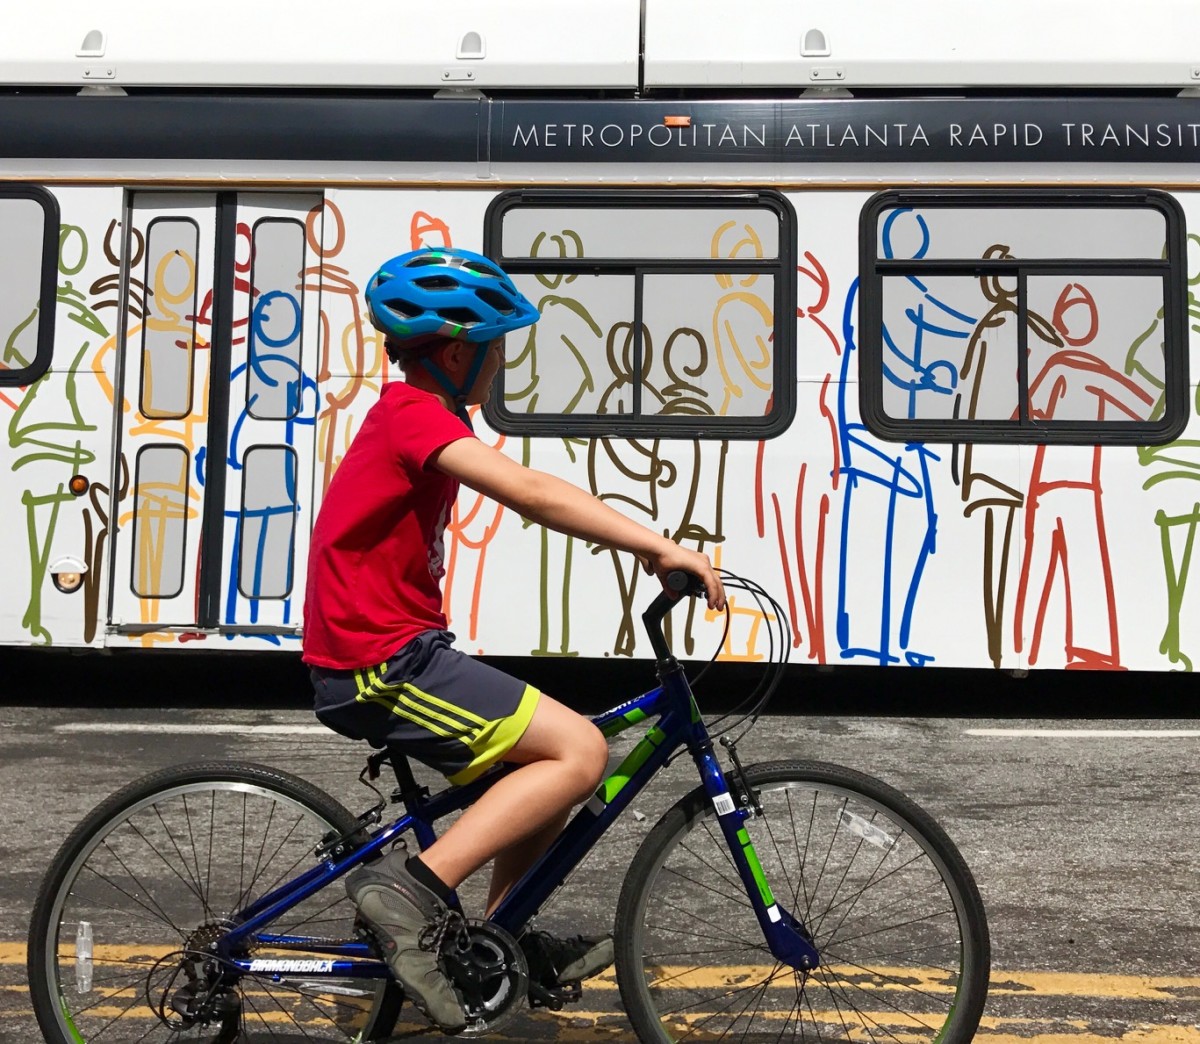 "Complete streets" are those that have safe spaces for cyclists, people walking, people driving and those catching the bus . Photo by Kelly Jordan